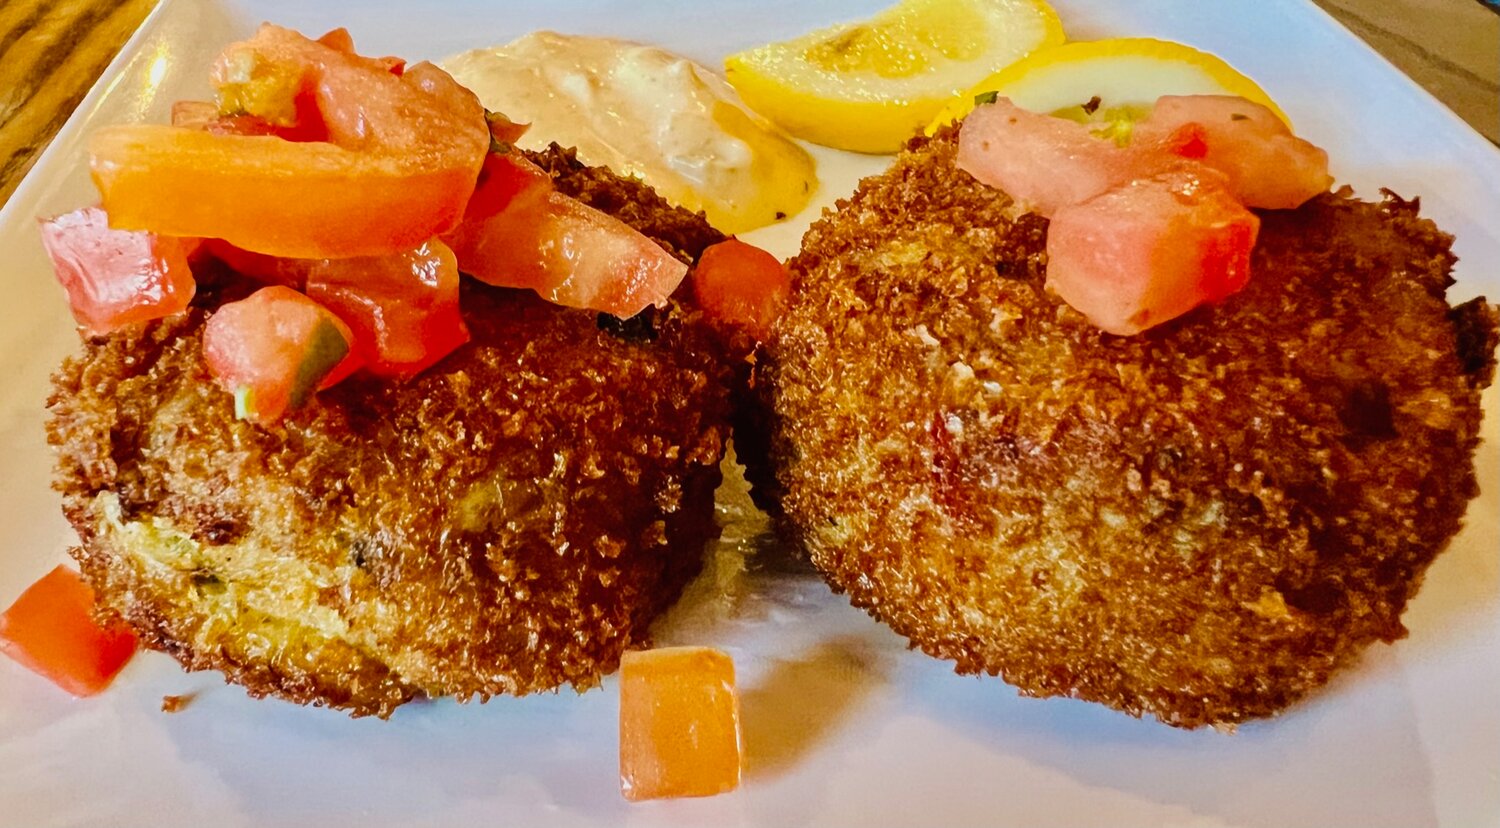 Crab cakes are served with a perfect remoulade at Vinson's